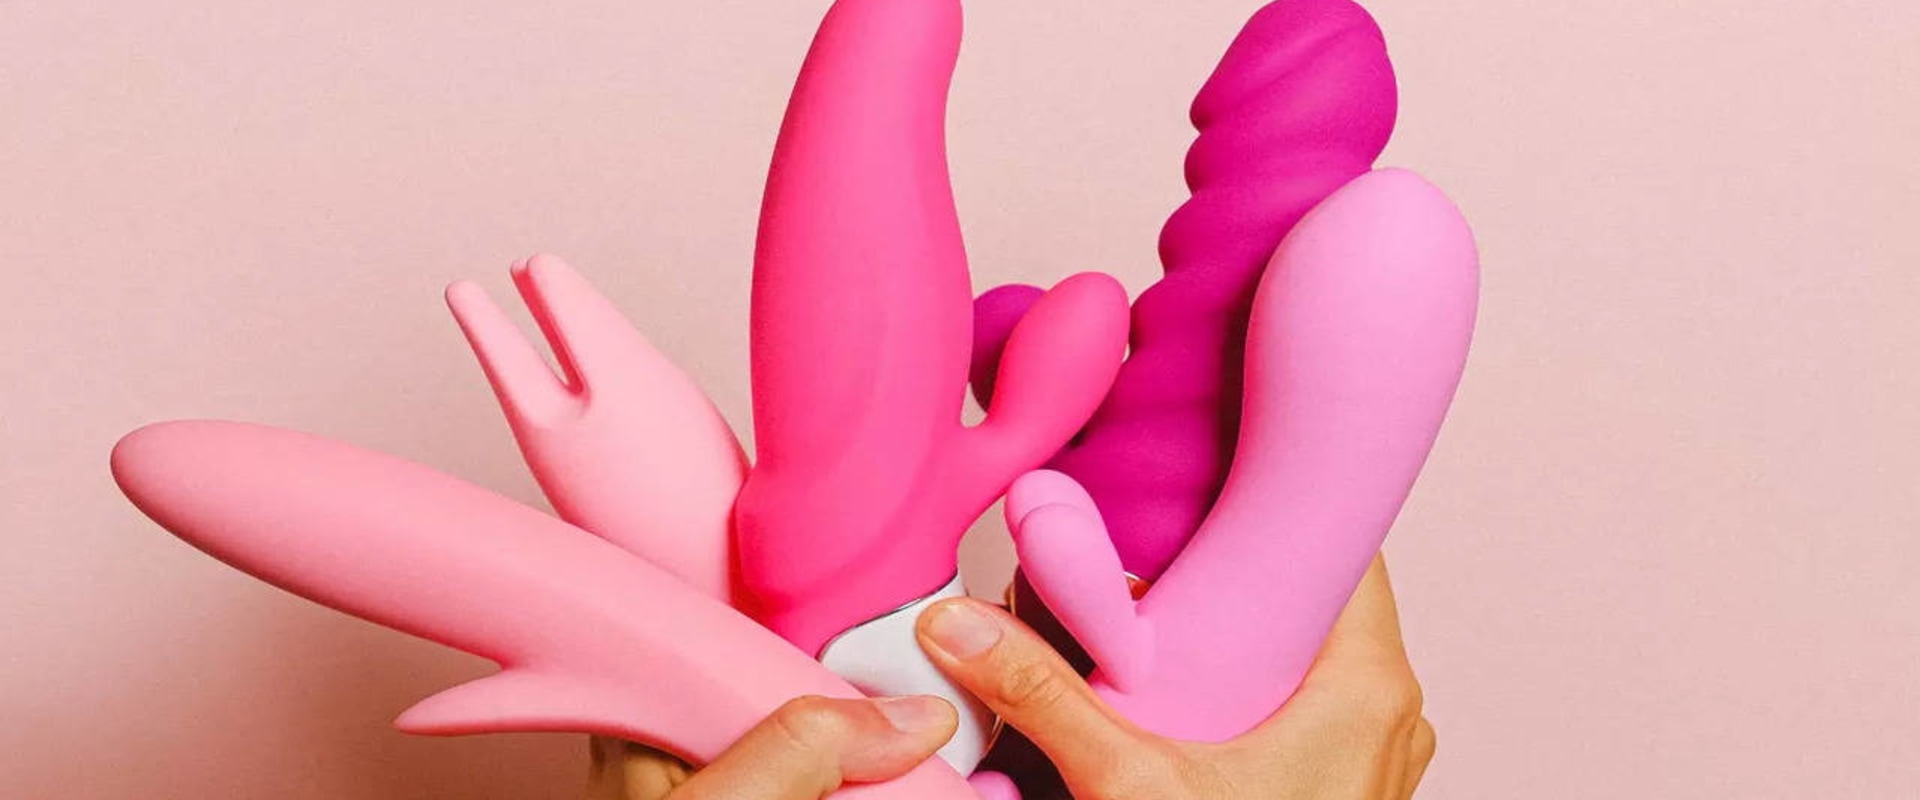 Vibrators: Busting the Myth of Loneliness